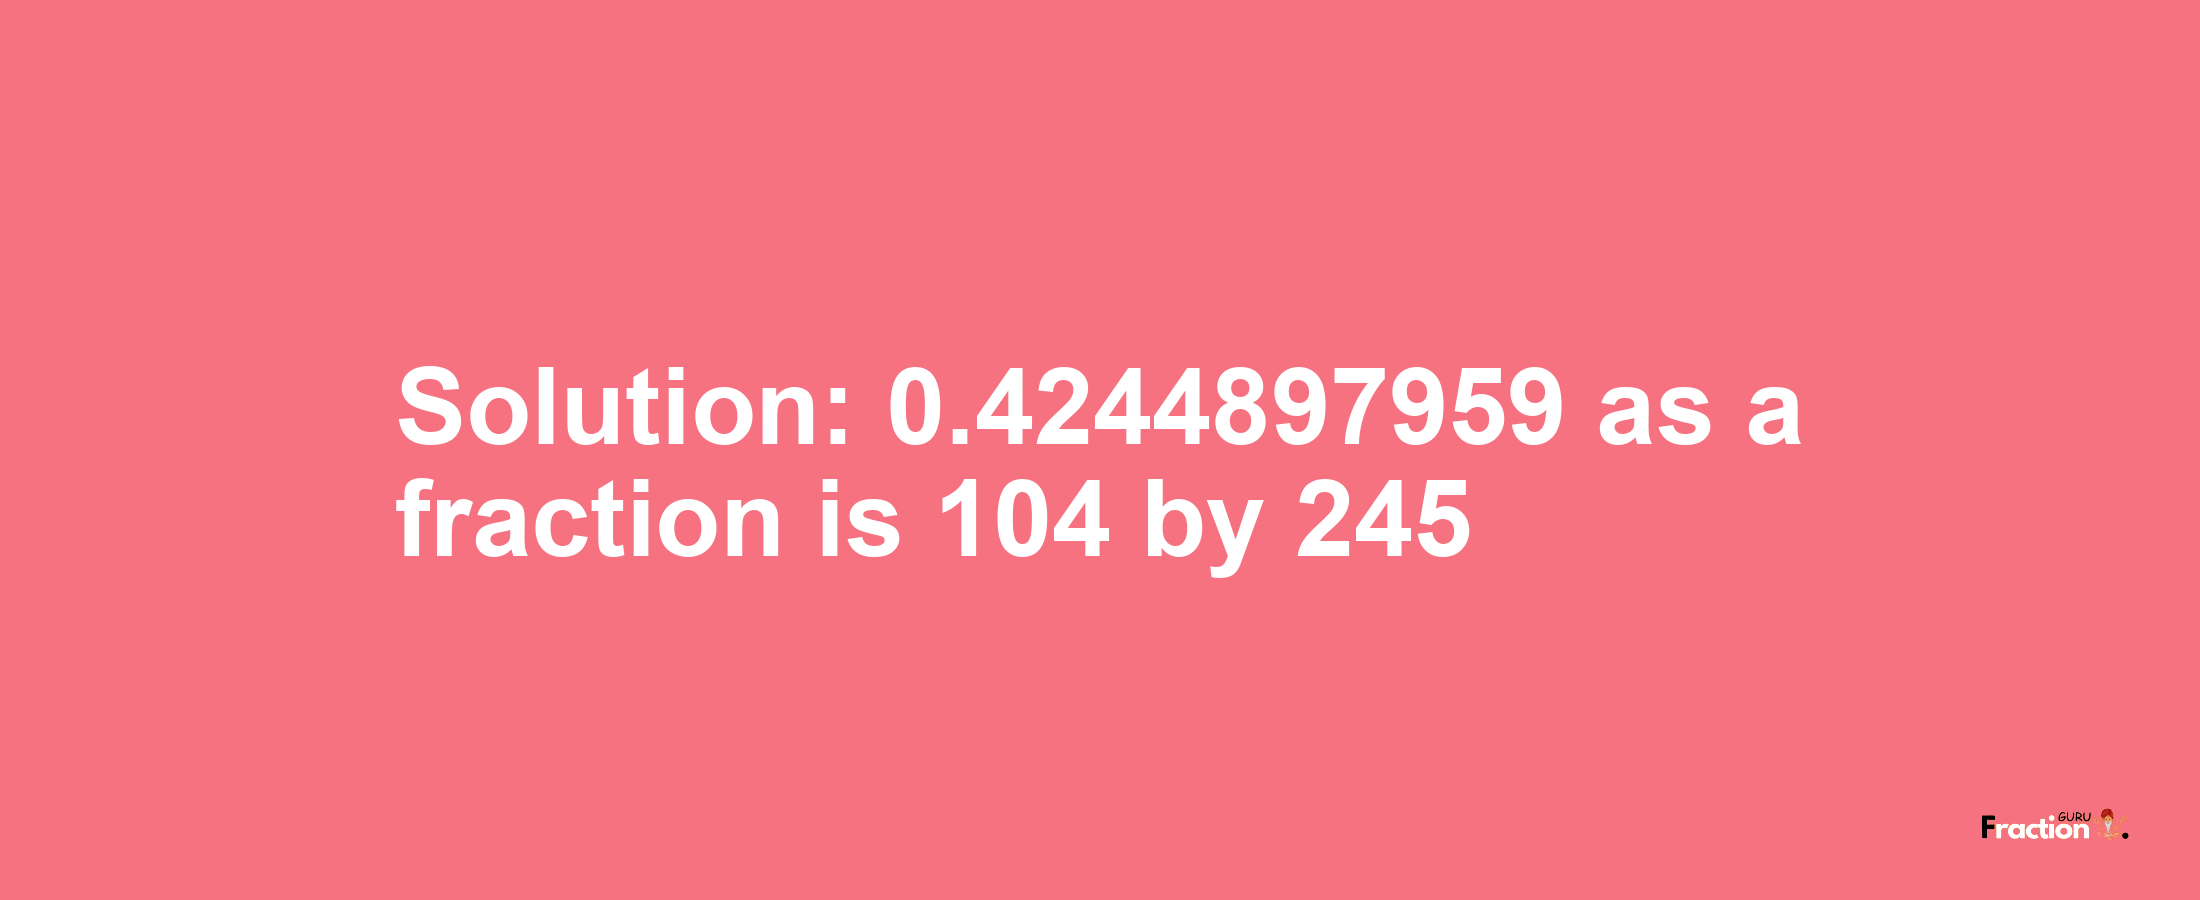 Solution:0.4244897959 as a fraction is 104/245